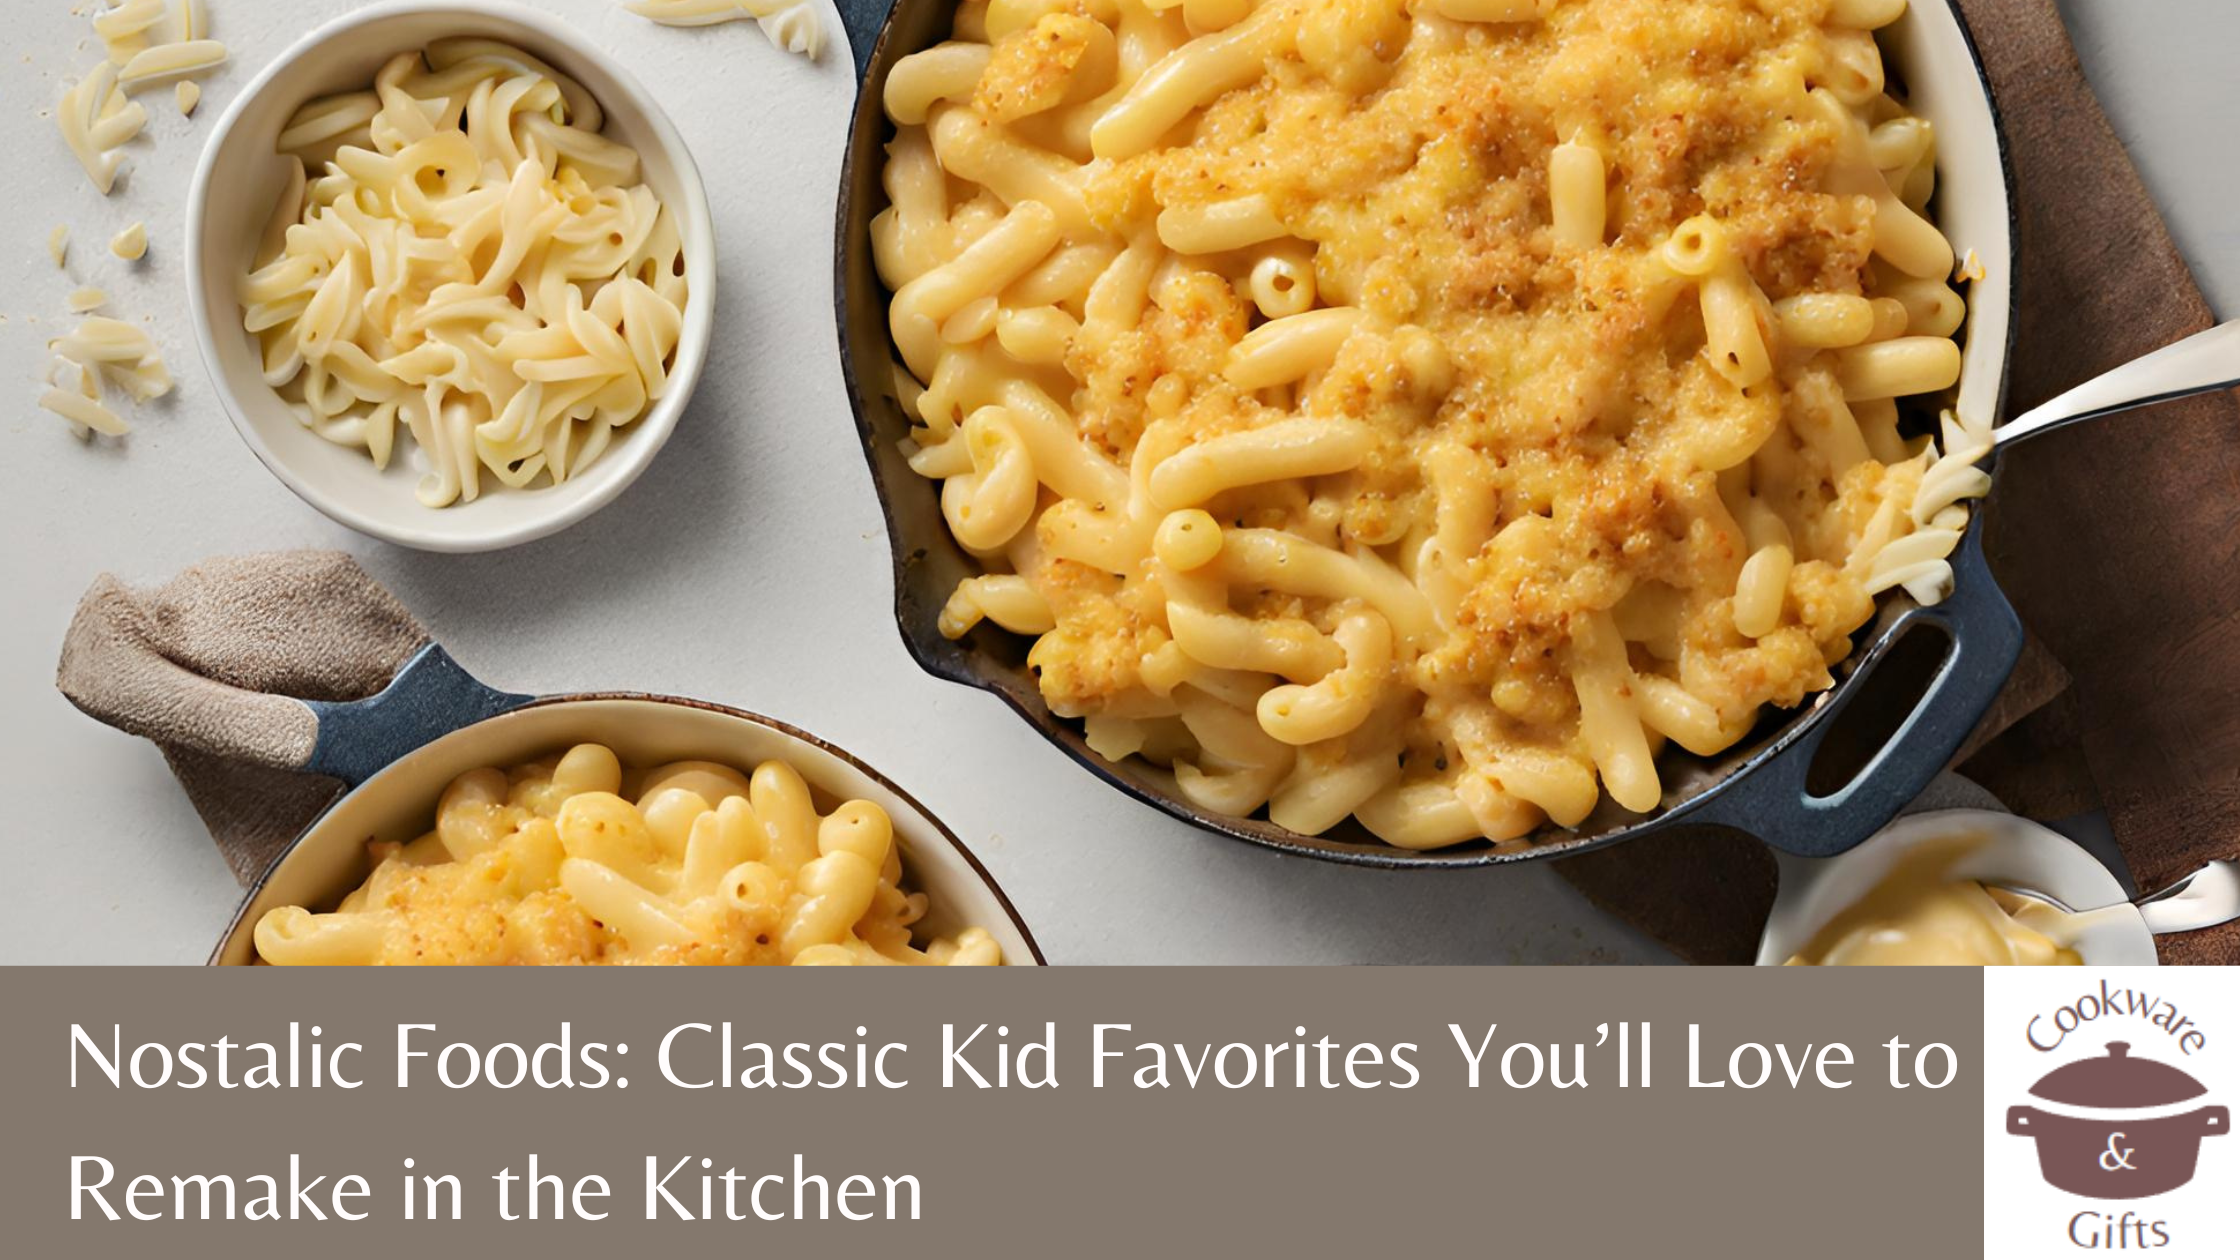 Nostalgic Foods: Classic Kid Favorites You’ll Love to Remake in the Kitchen